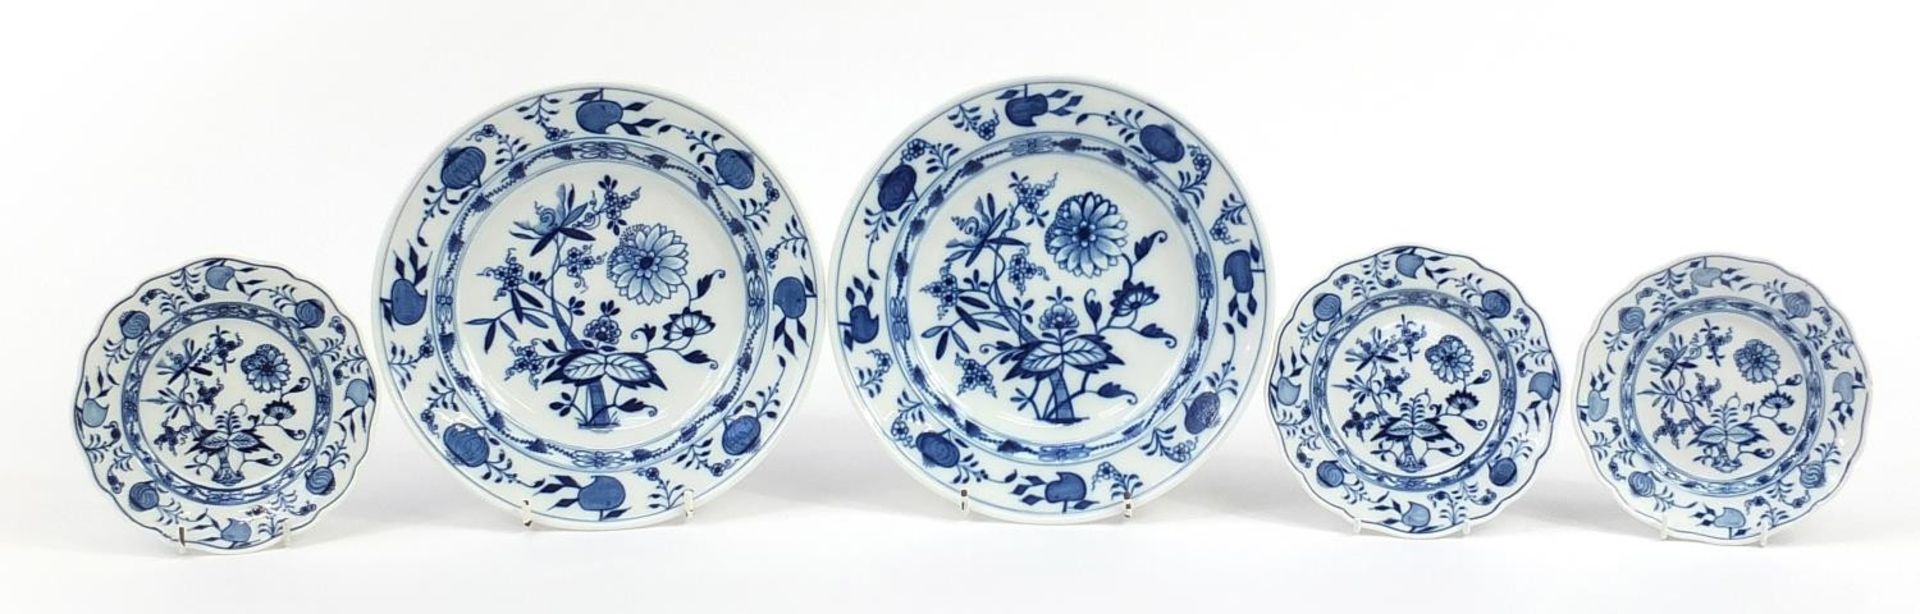 Meissen, German blue and white porcelain comprising two plates and three side plates, each hand